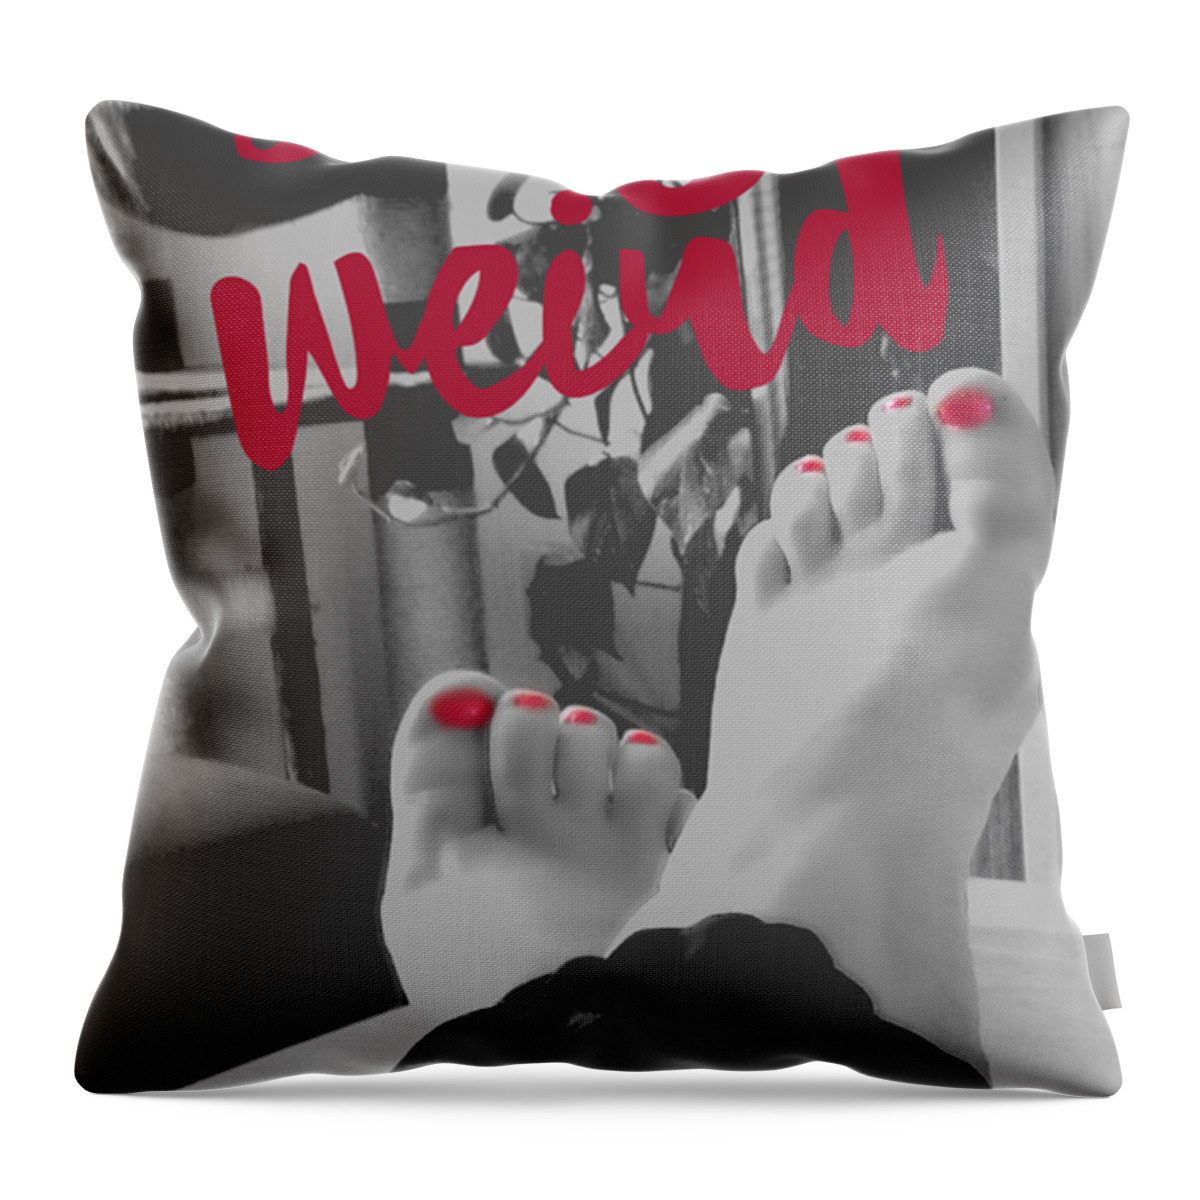 Black And White Throw Pillow featuring the photograph Stay weird with proud. by Eskemida Pictures